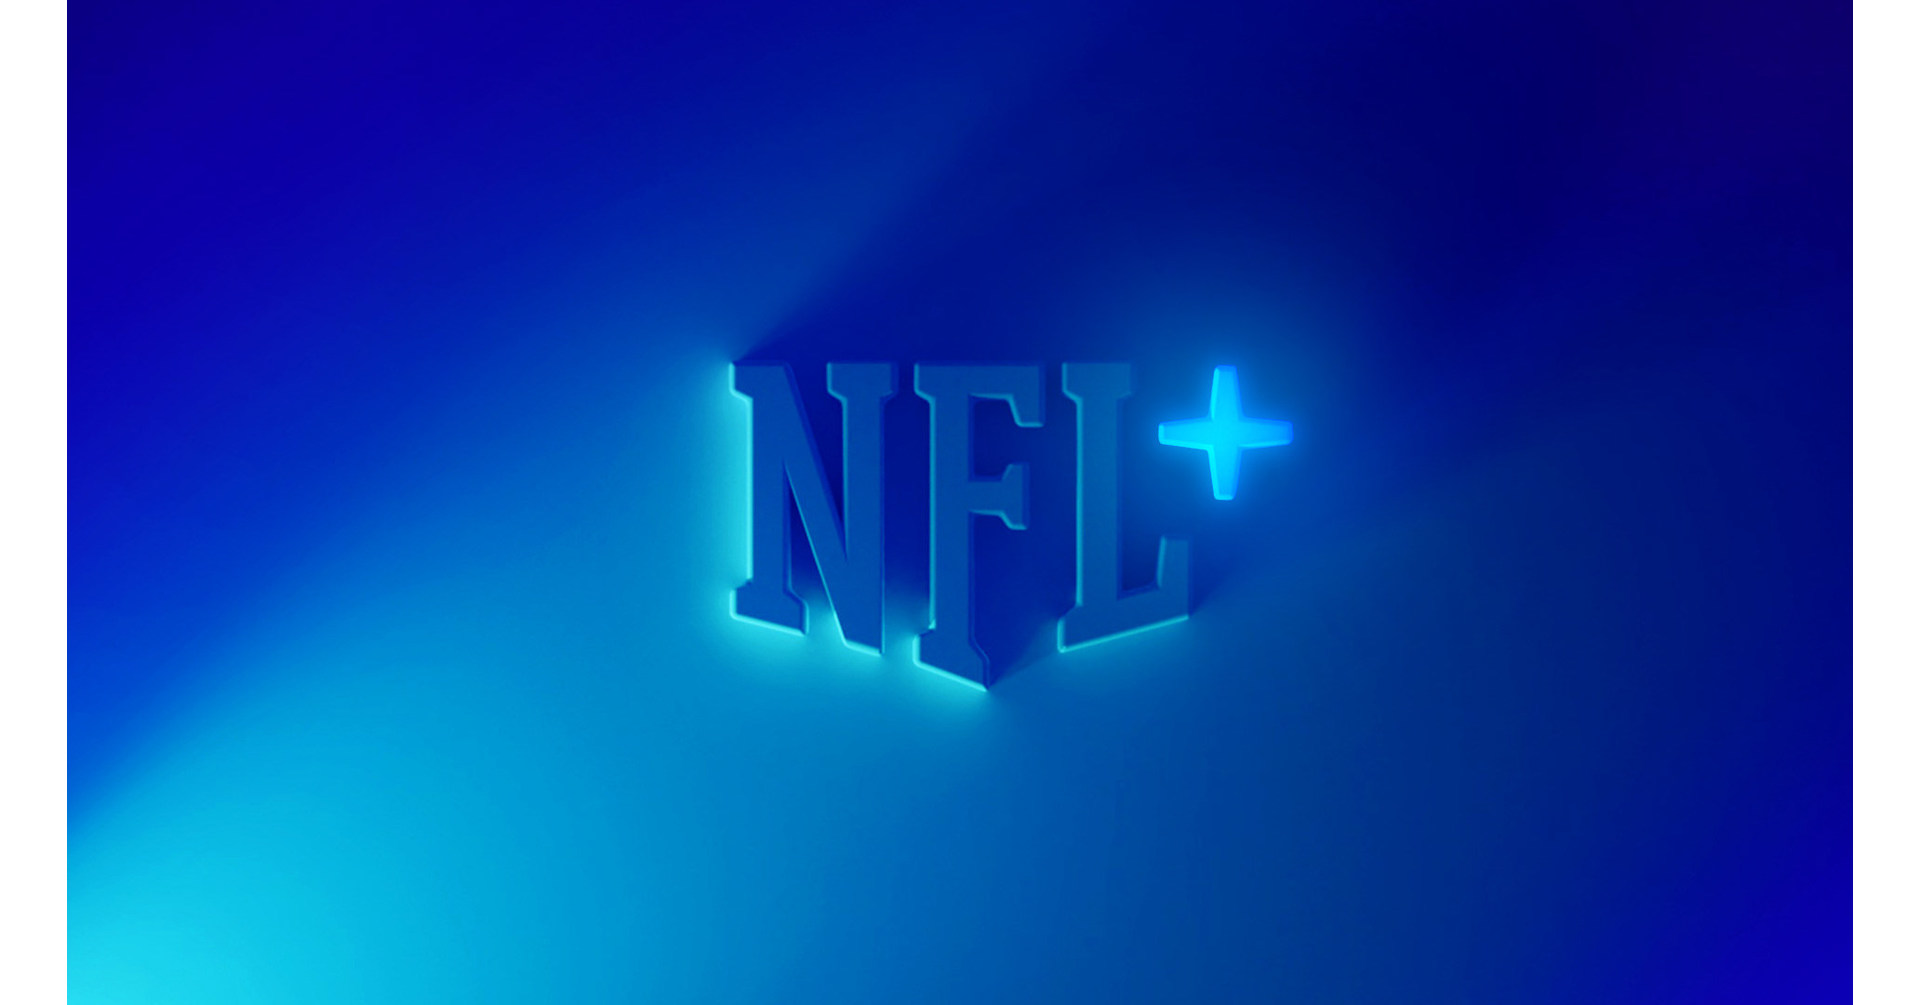 NFL launches NFL+ streaming service